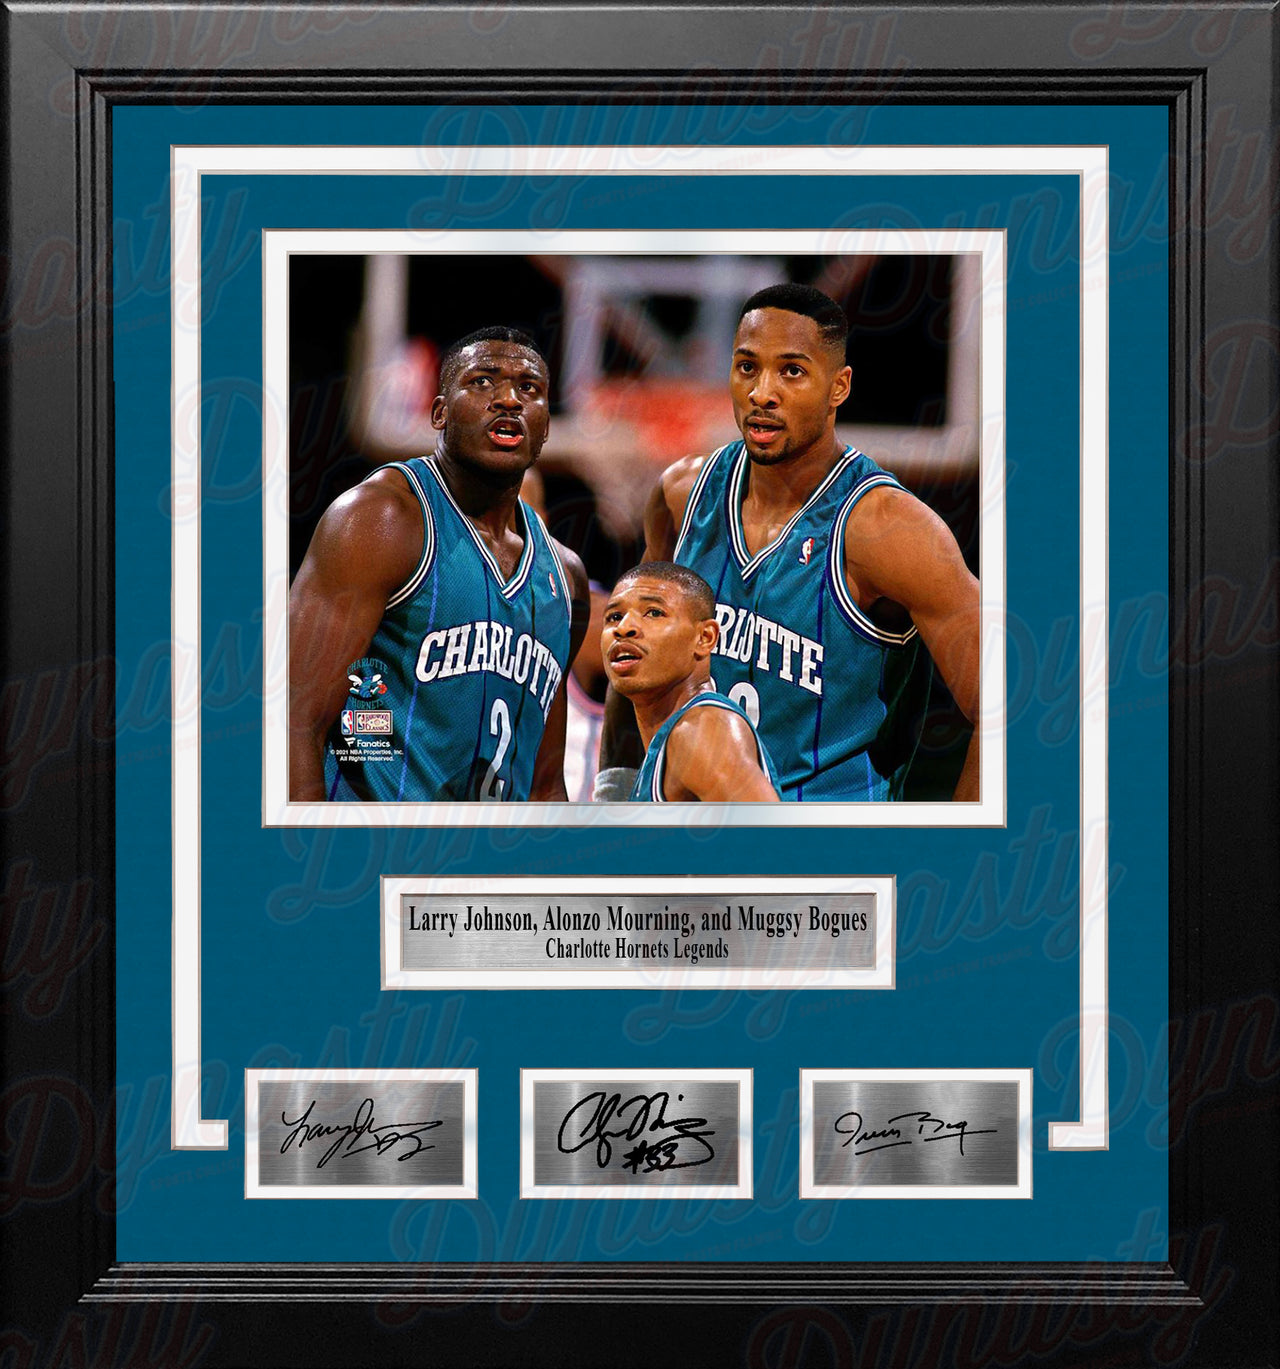 Larry Johnson, Alonzo Mourning, Muggsy Bogues Hornets 8x10 Framed Photo with Engraved Autographs - Dynasty Sports & Framing 